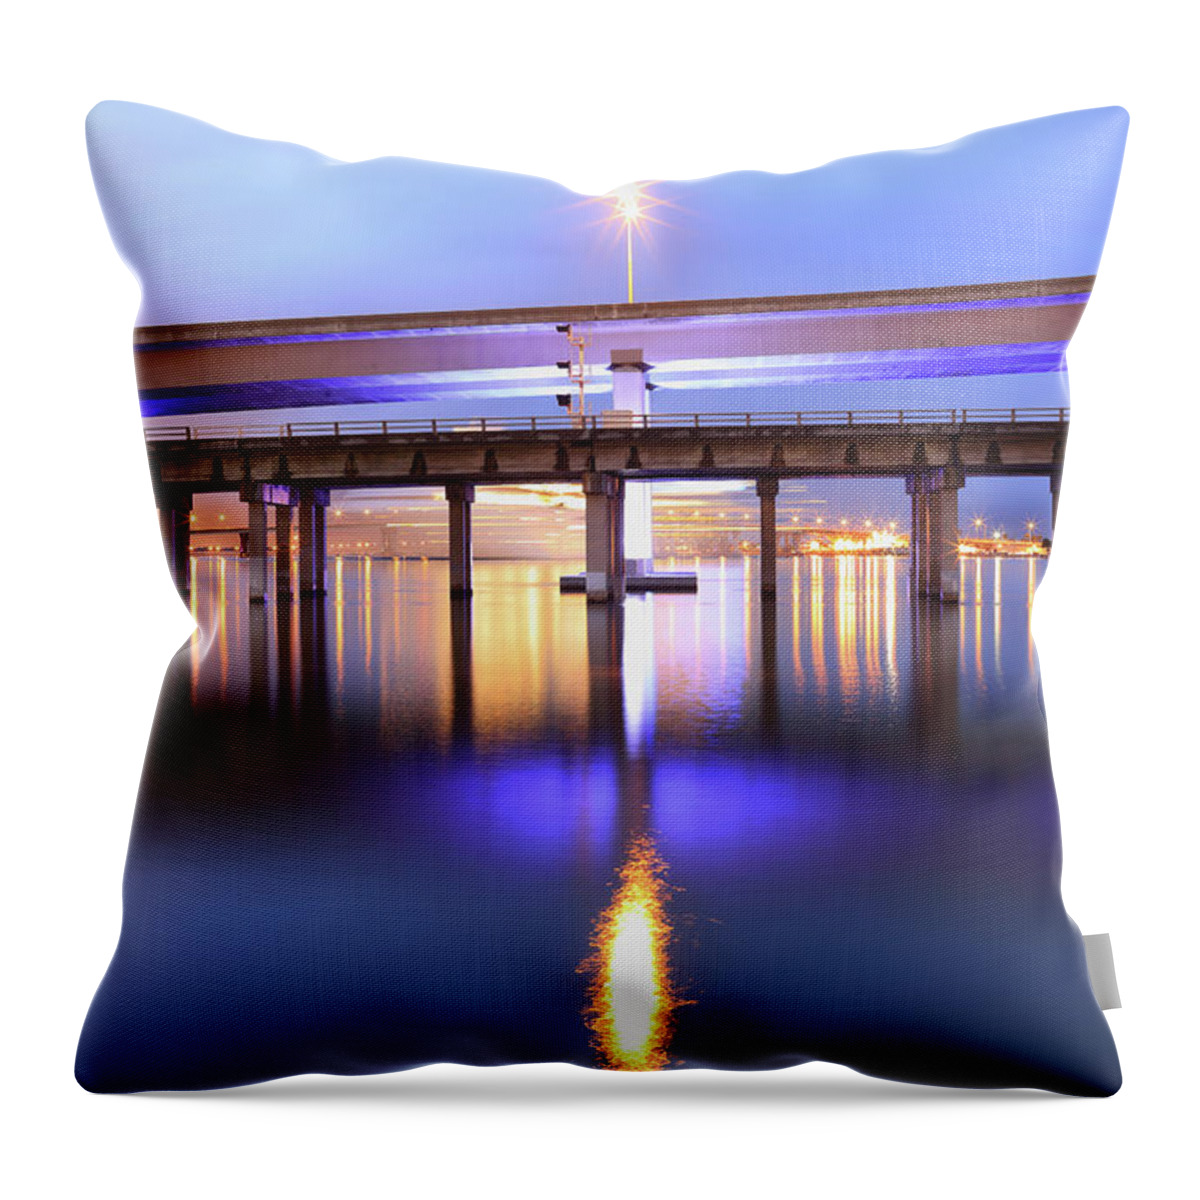 Scenics Throw Pillow featuring the photograph Florida Miami by Shunyufan